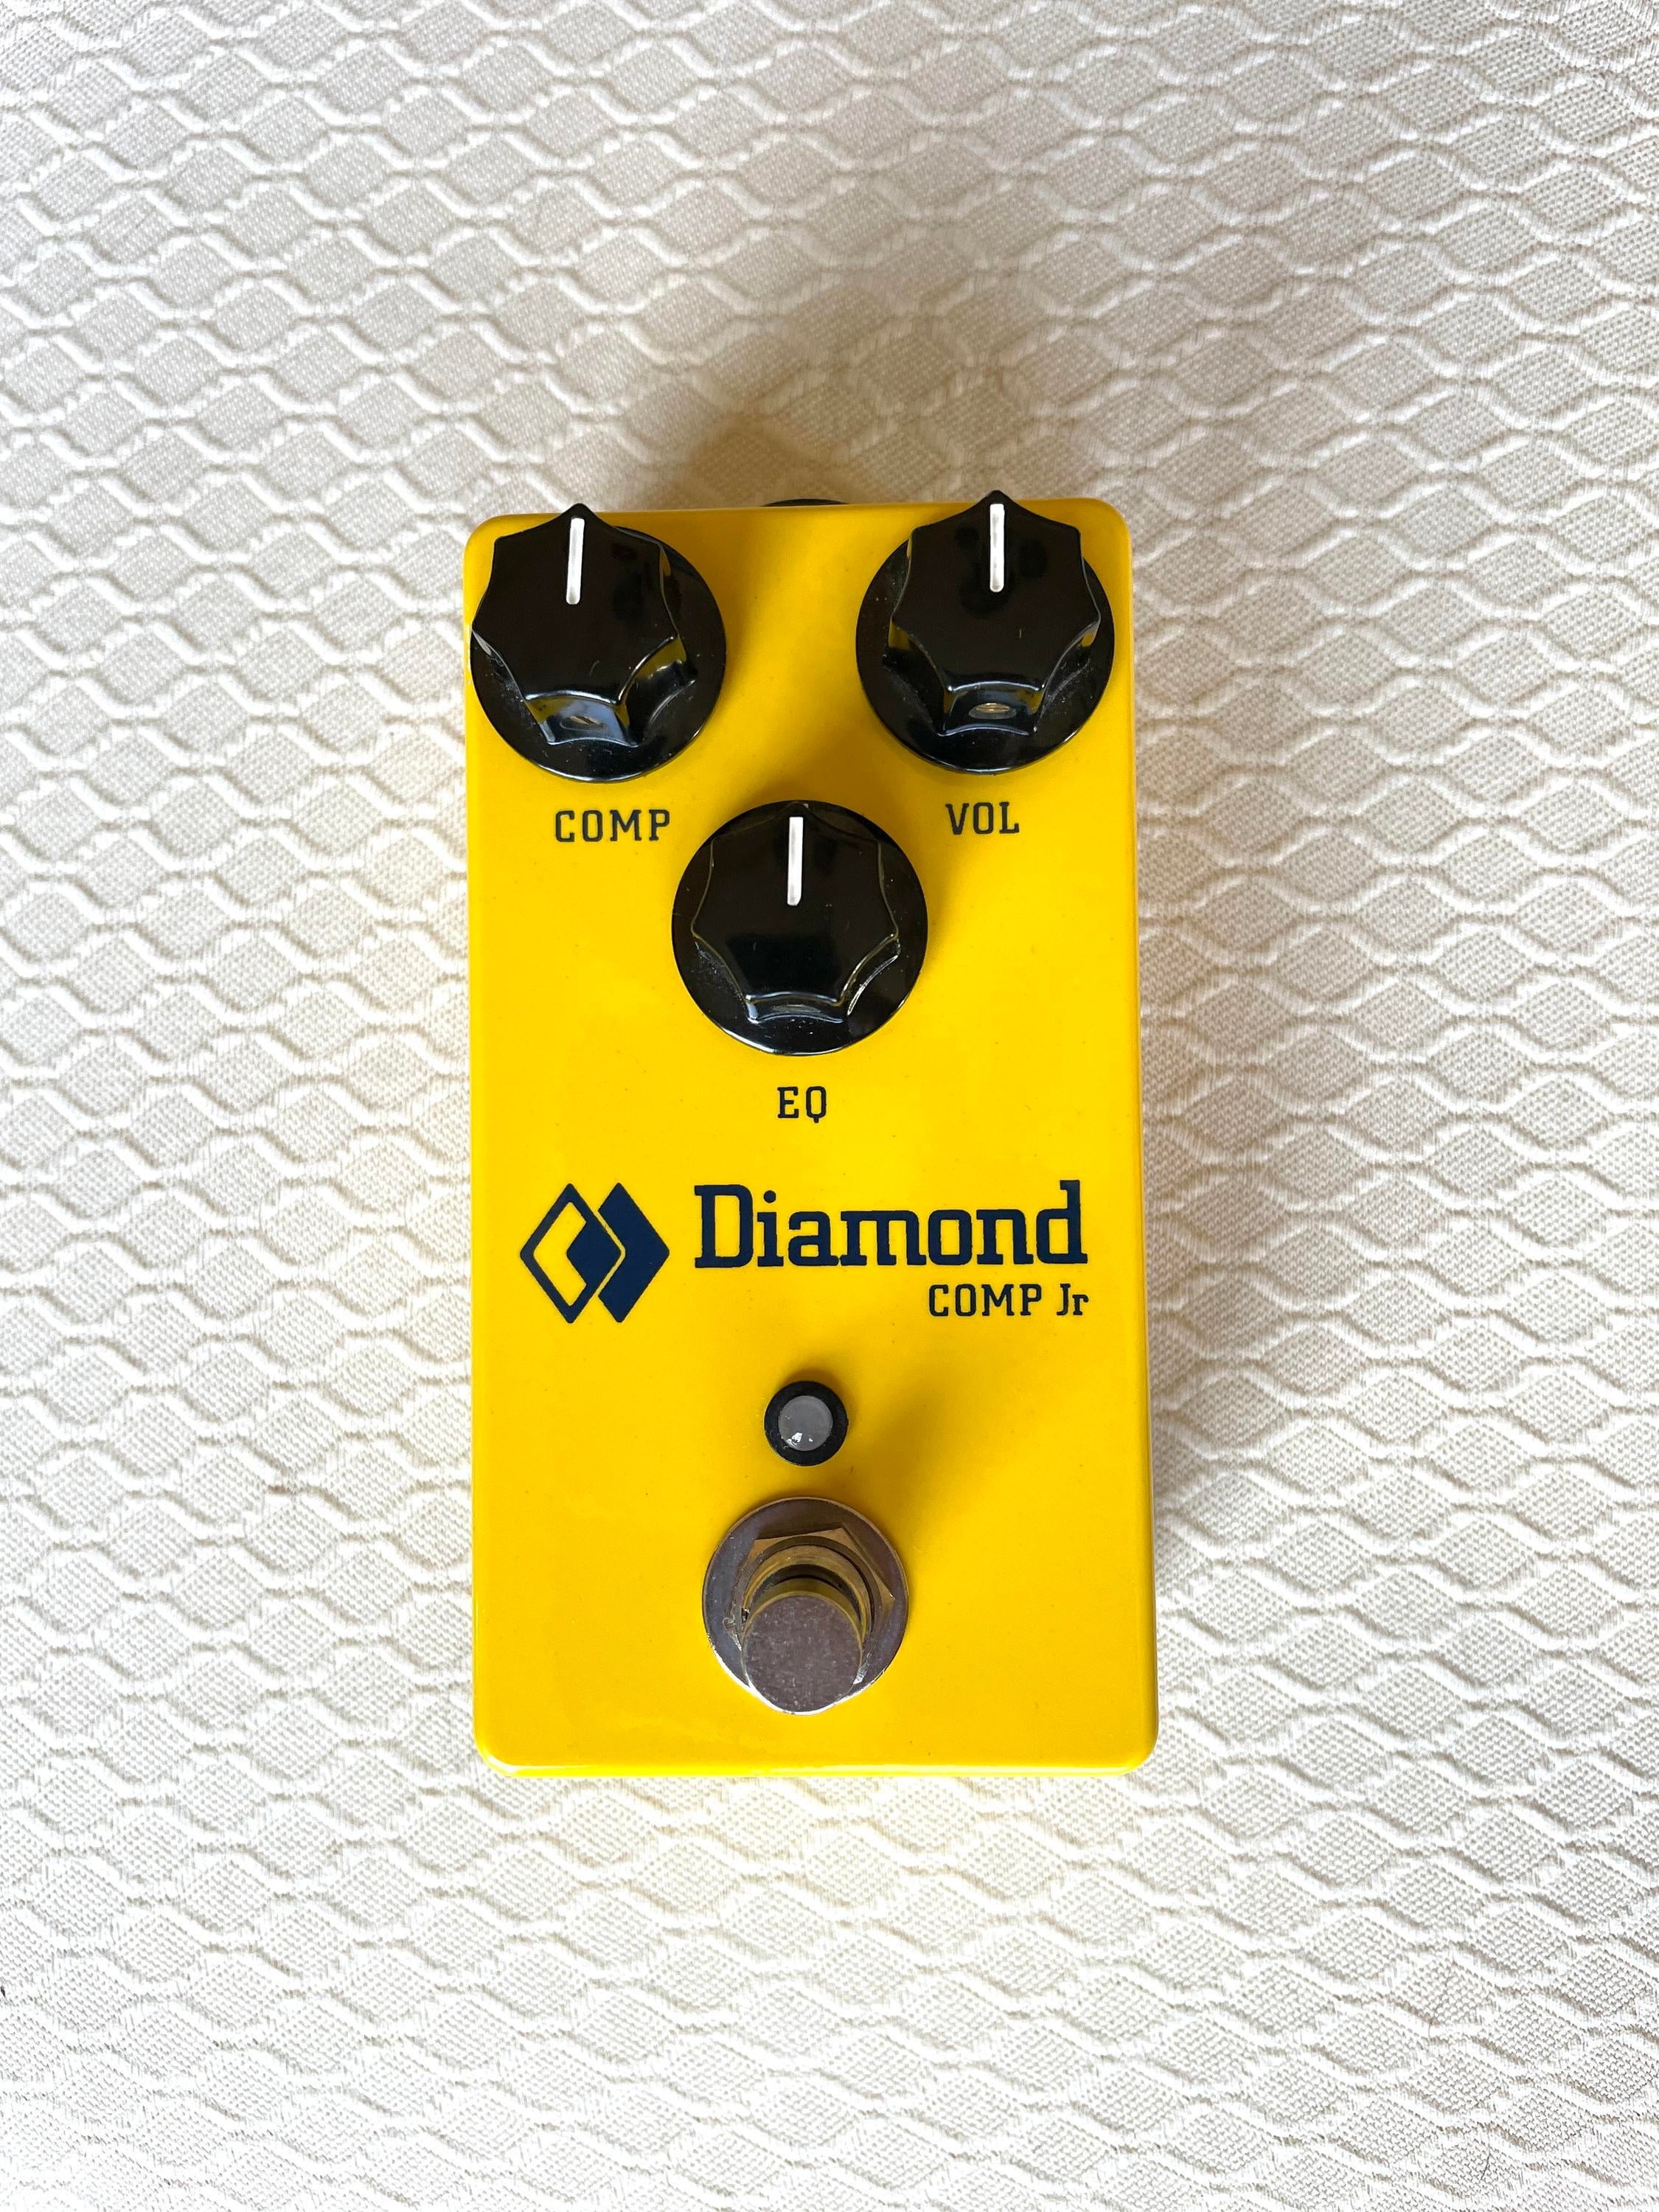 Used Diamond Comp Jr - Optical Compressor - Sweetwater's Gear Exchange